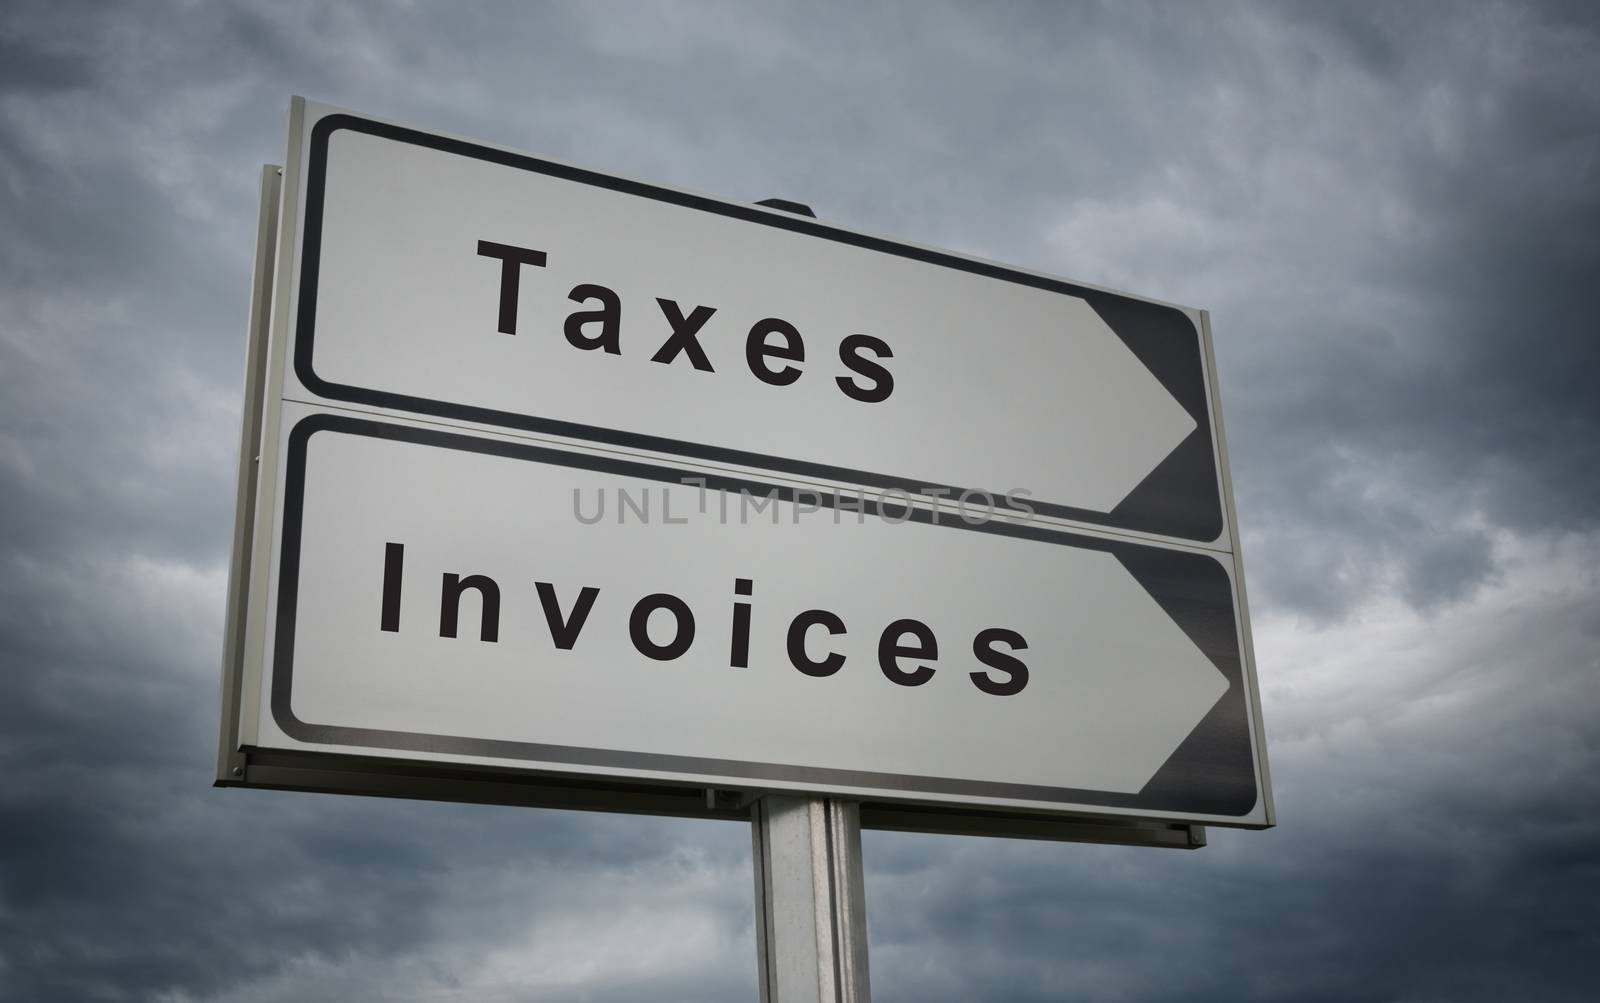 Taxes Invoices conceptual road sign. by BPhoto